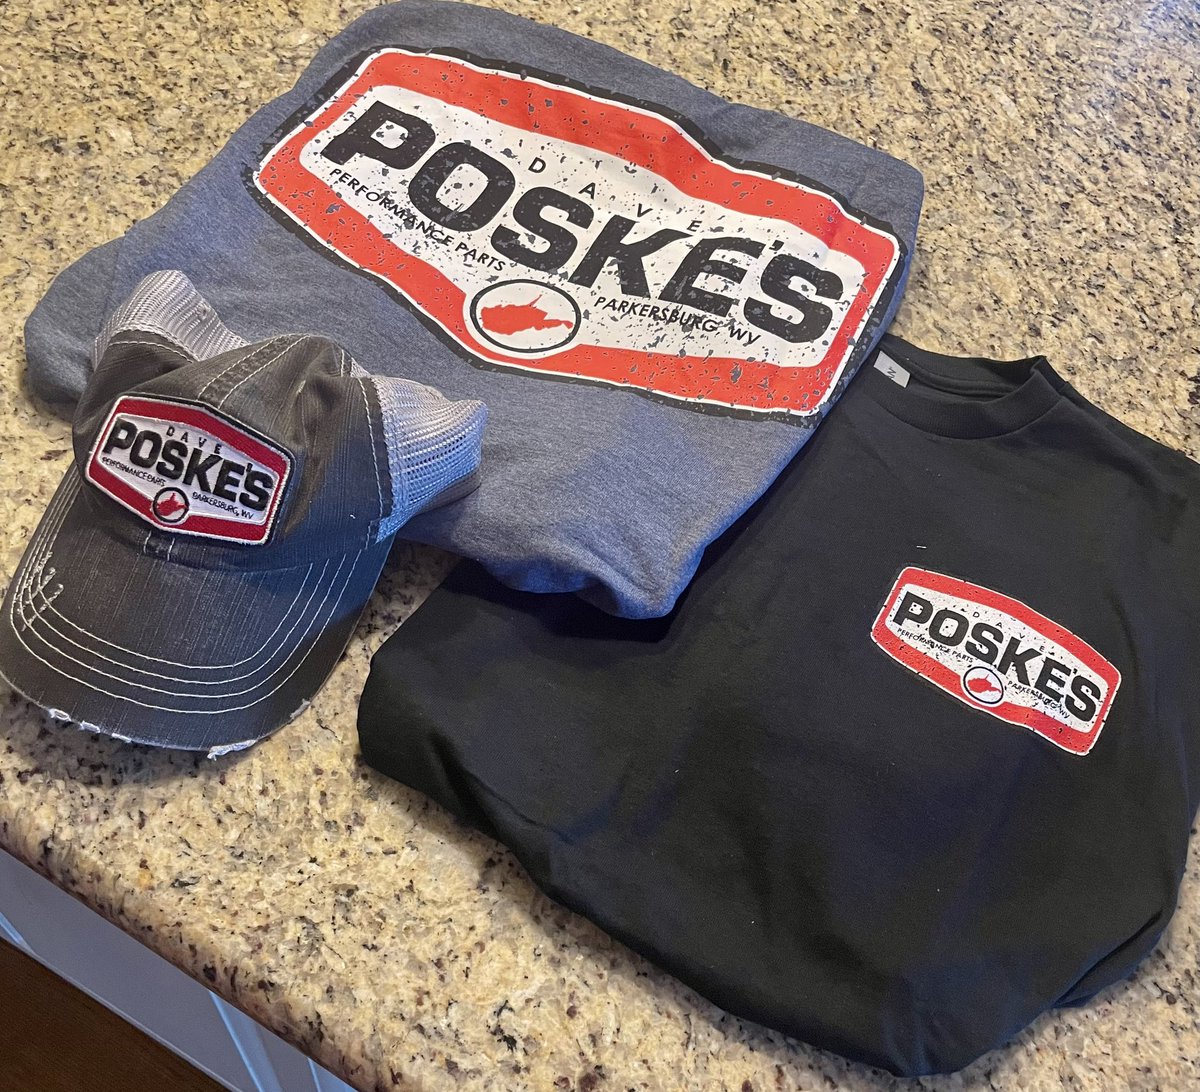 Rolled back in town to find this sweet swag pack waiting on me from Dave Poske's Perf. Parts. David Poske, Bryan Metz & all the team at Poske’s have been great supporters of me for several years. I can’t thank them enough. Grab your new swag at Poske.com #thankful